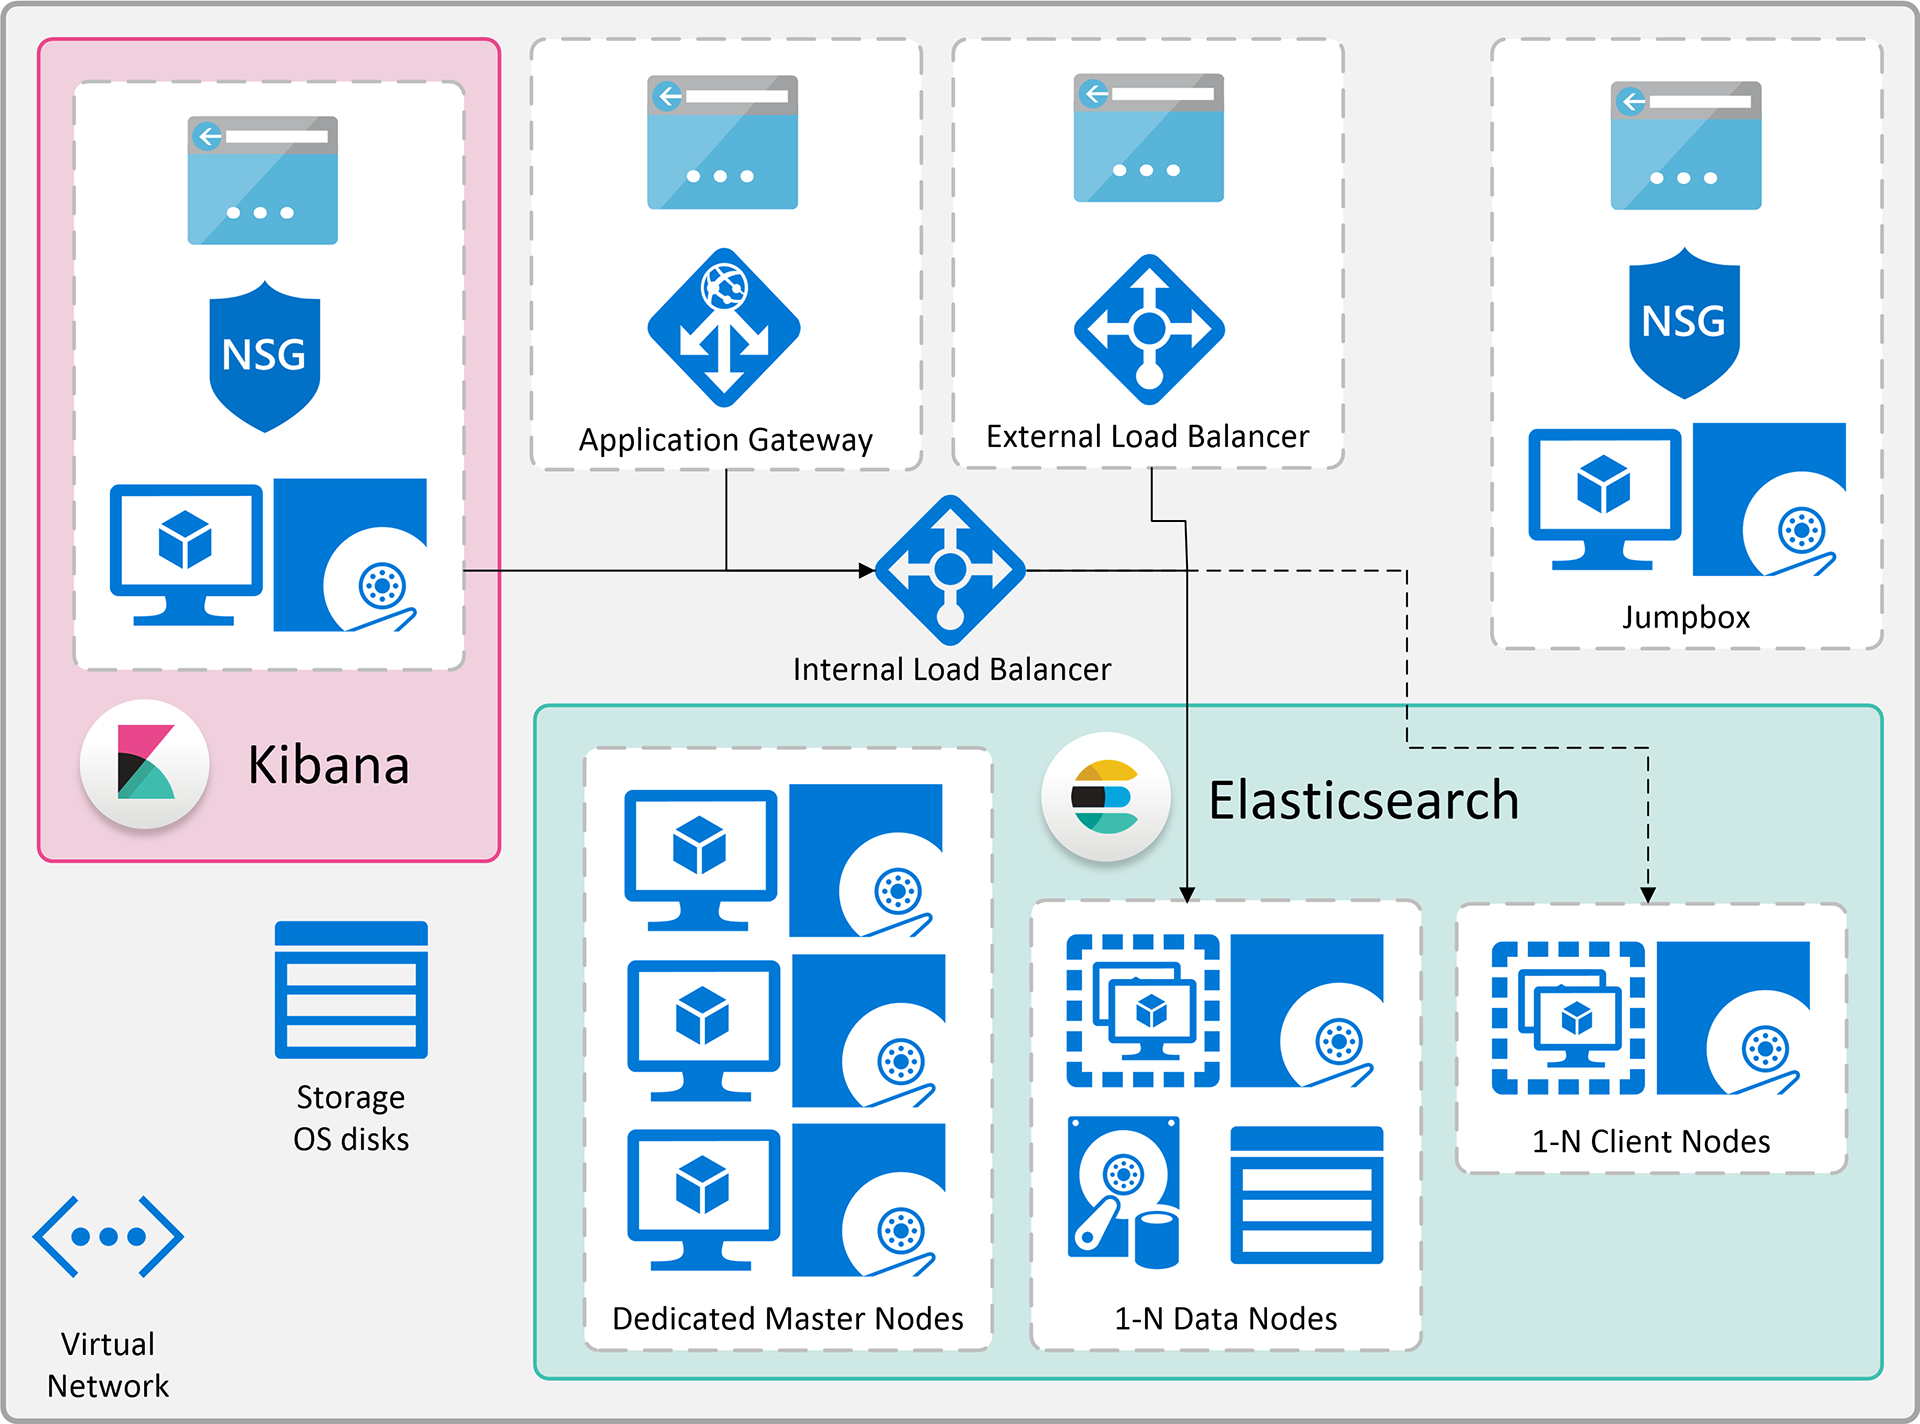 An overview of the Azure resources that can be deployed through the ARM template